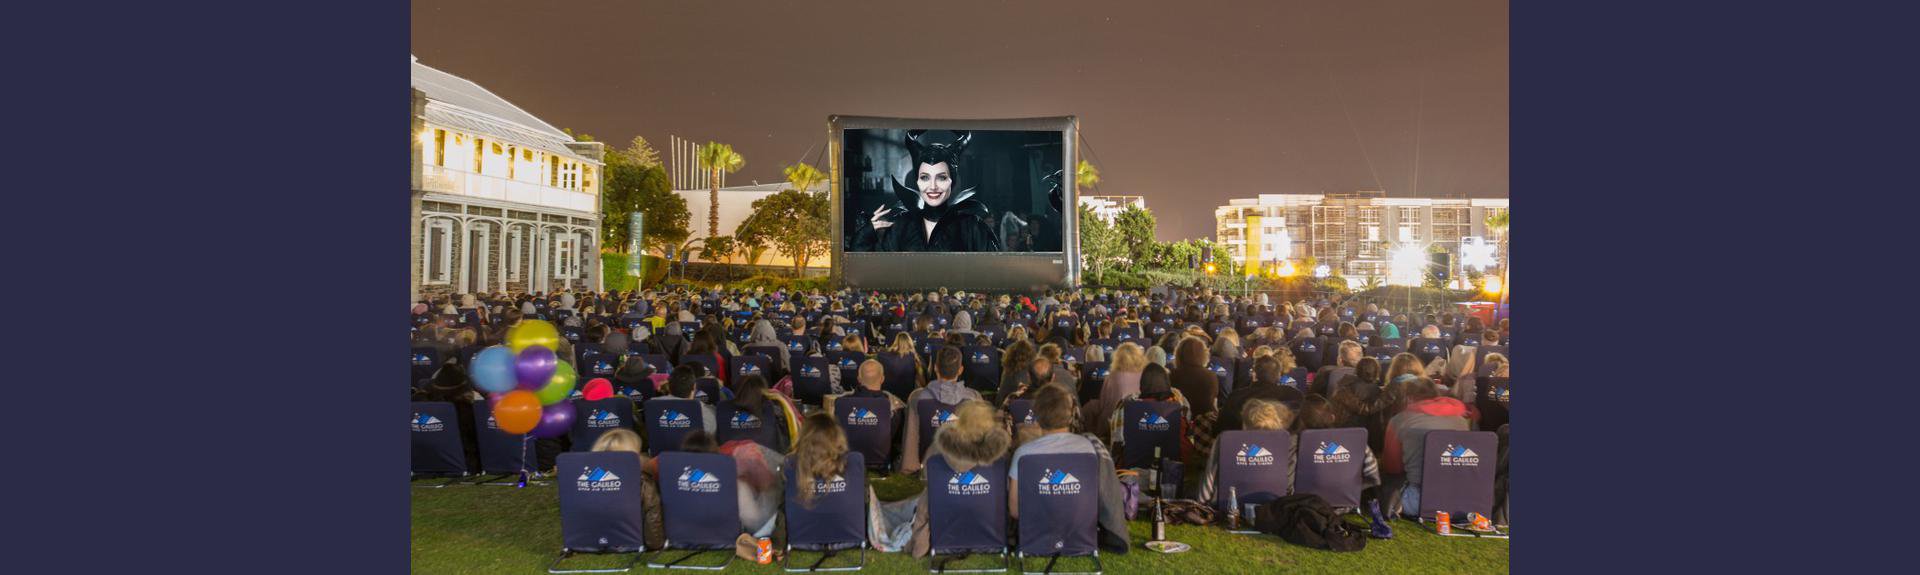 Outdoor movies: Maleficent